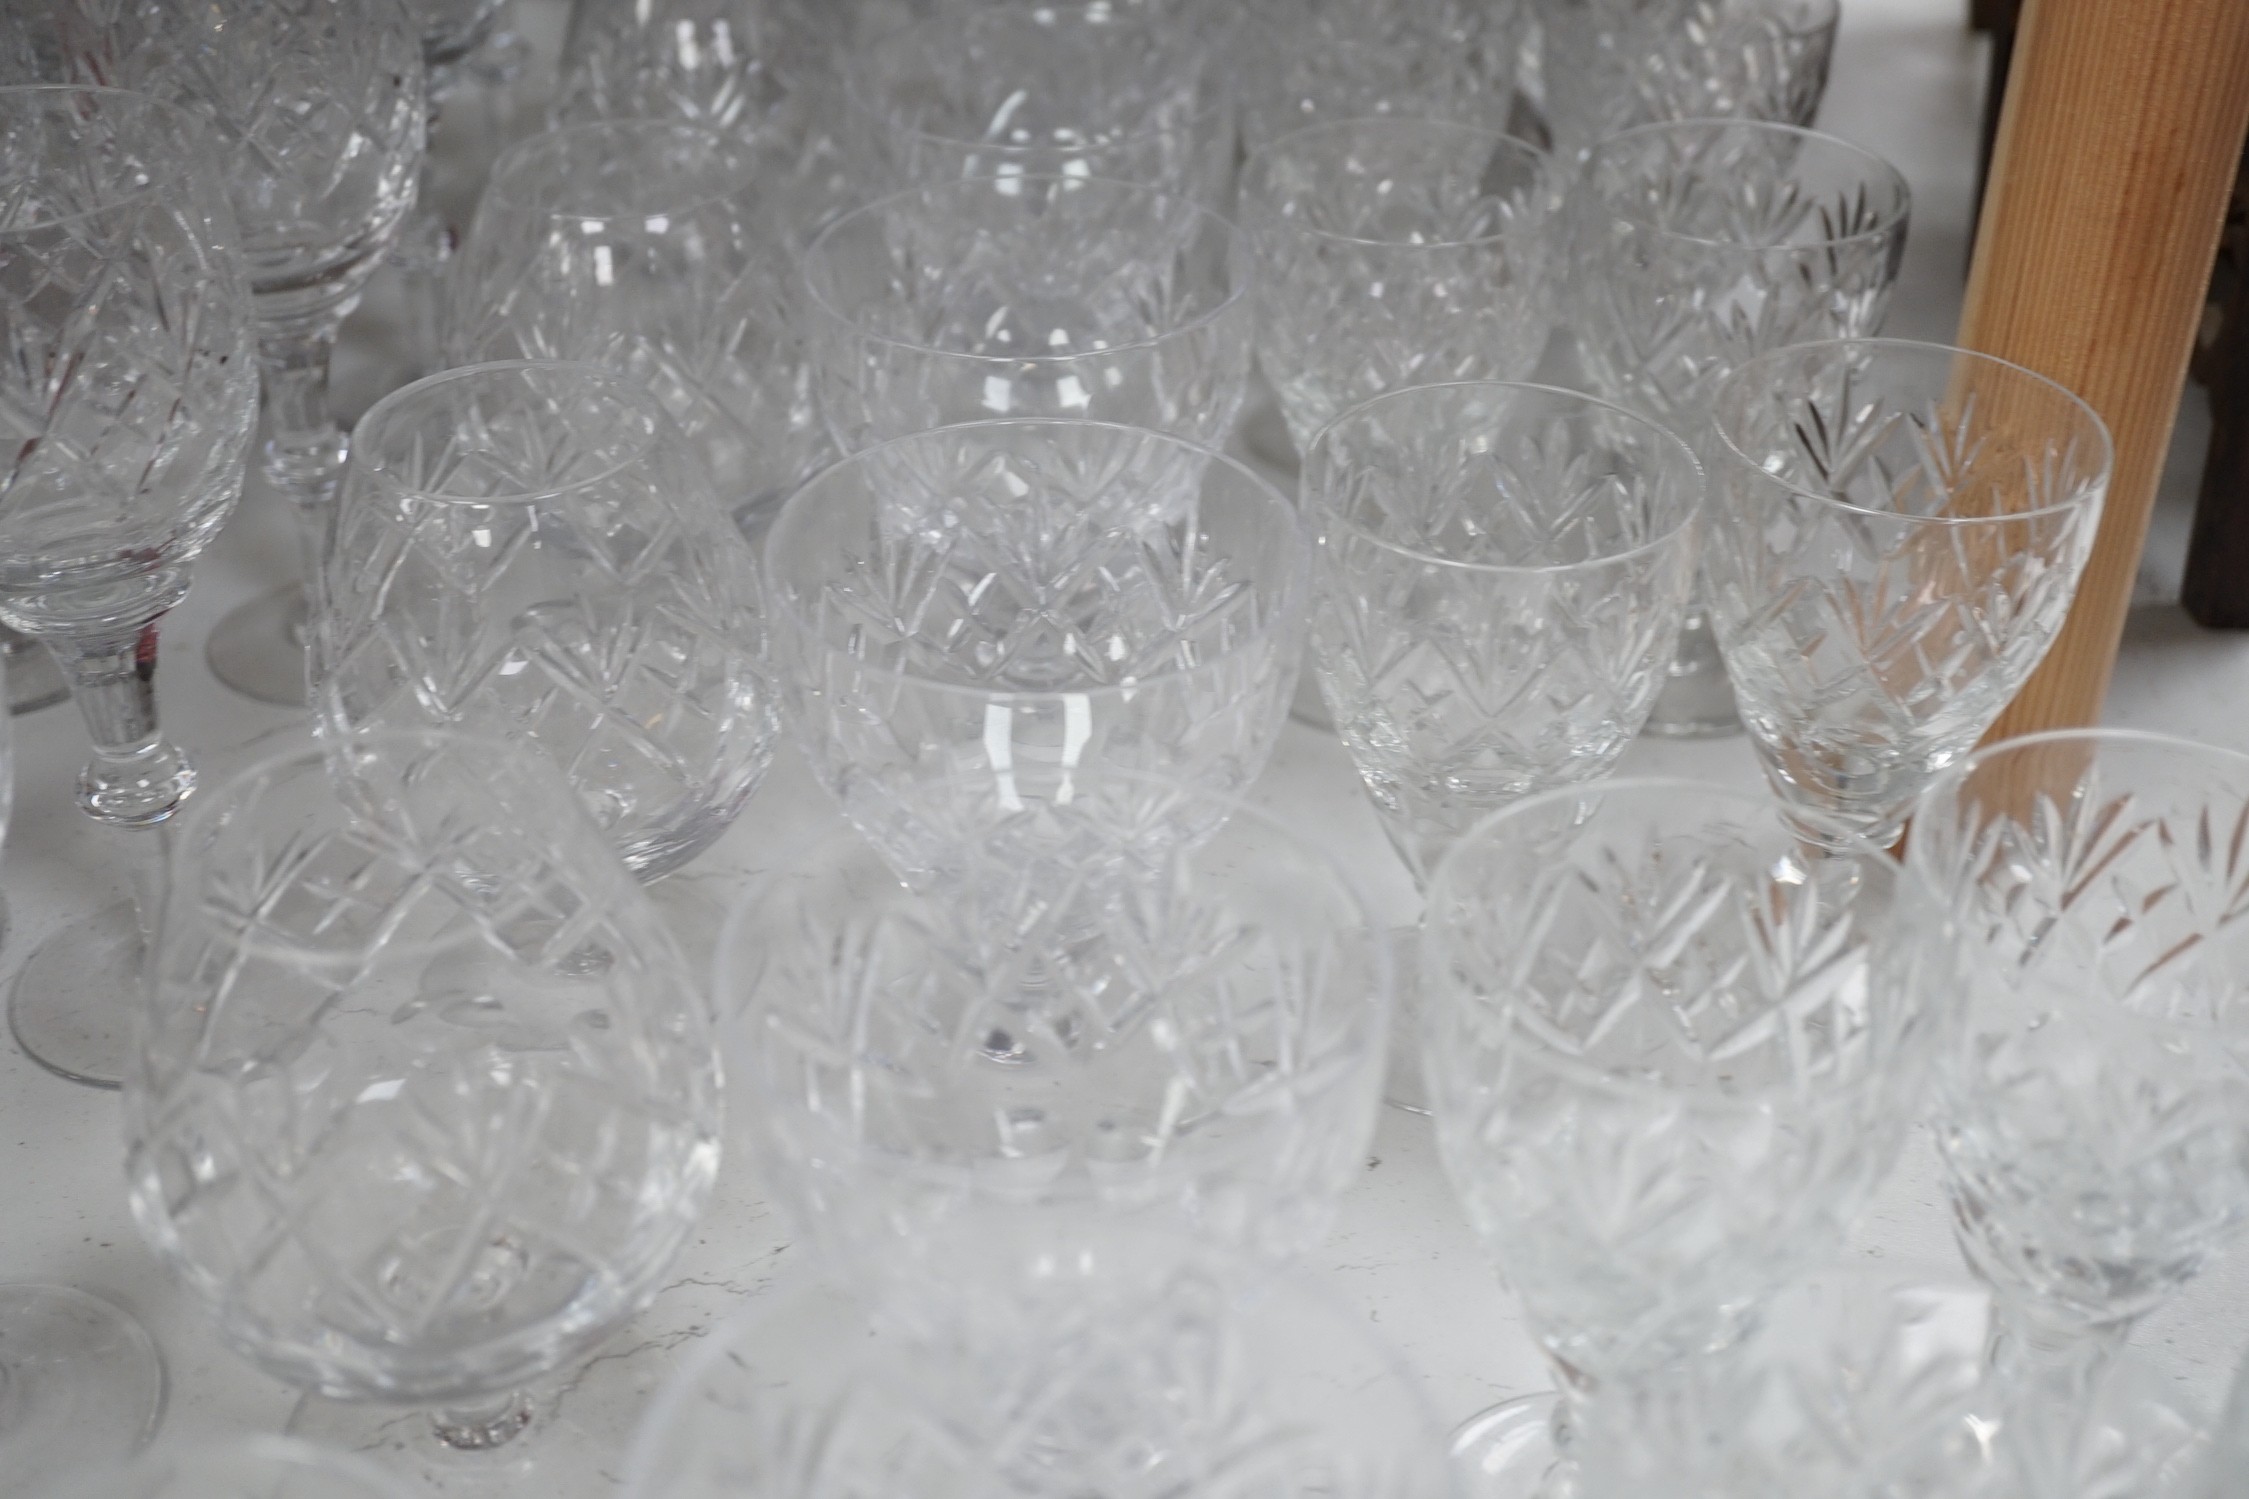 A collection of Royal Doulton glassware, to include: wine glasses, brandy balloons, etc. - Image 5 of 10